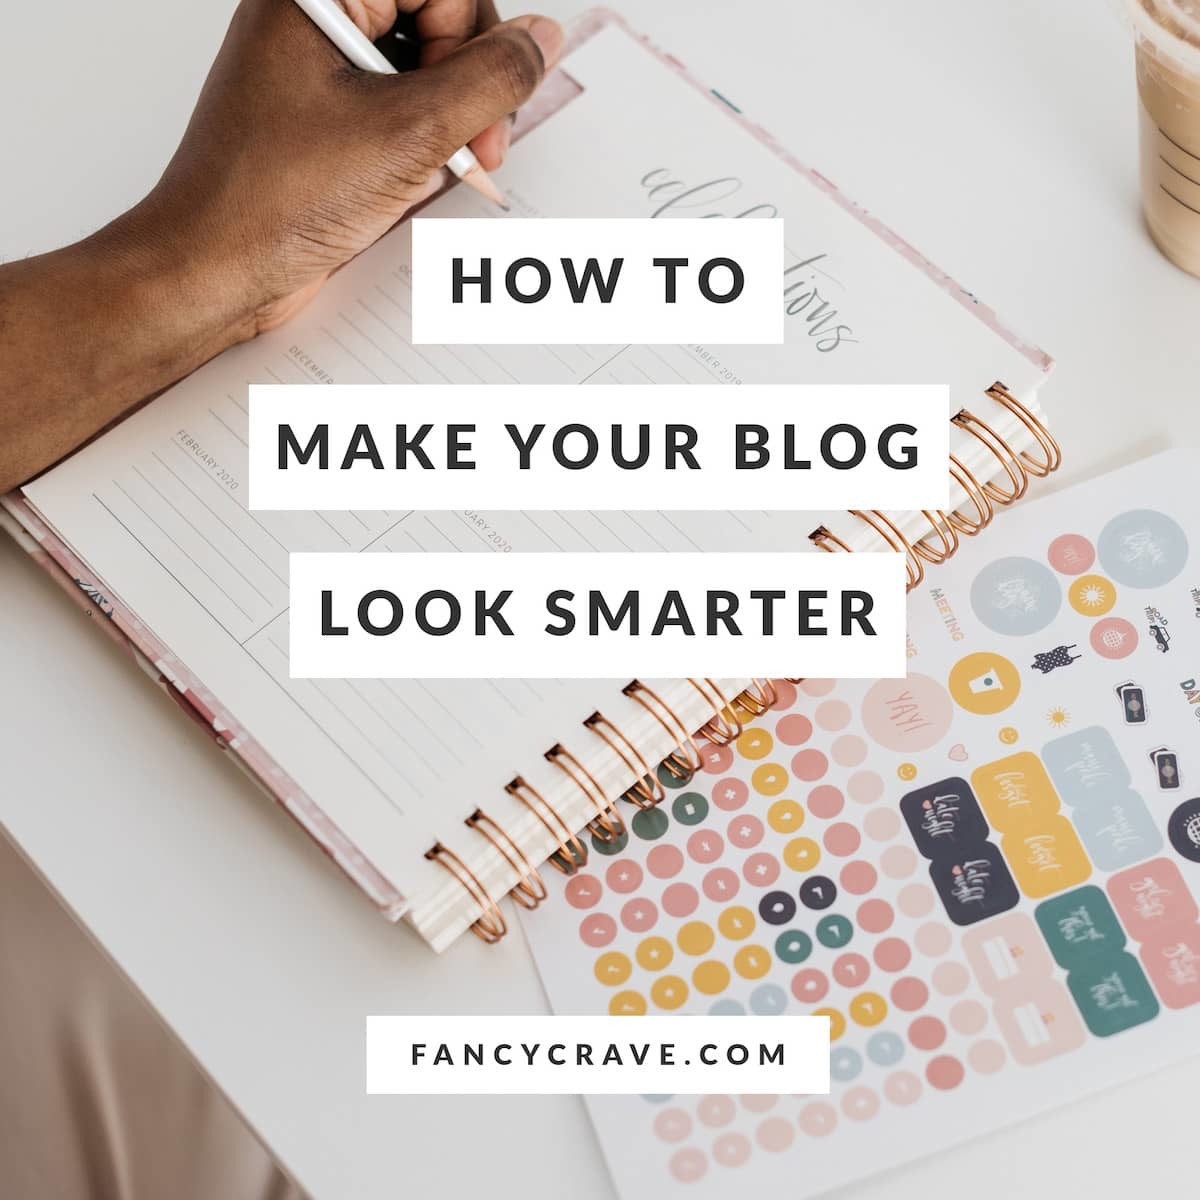 How To Make Your Blog Look Smarter